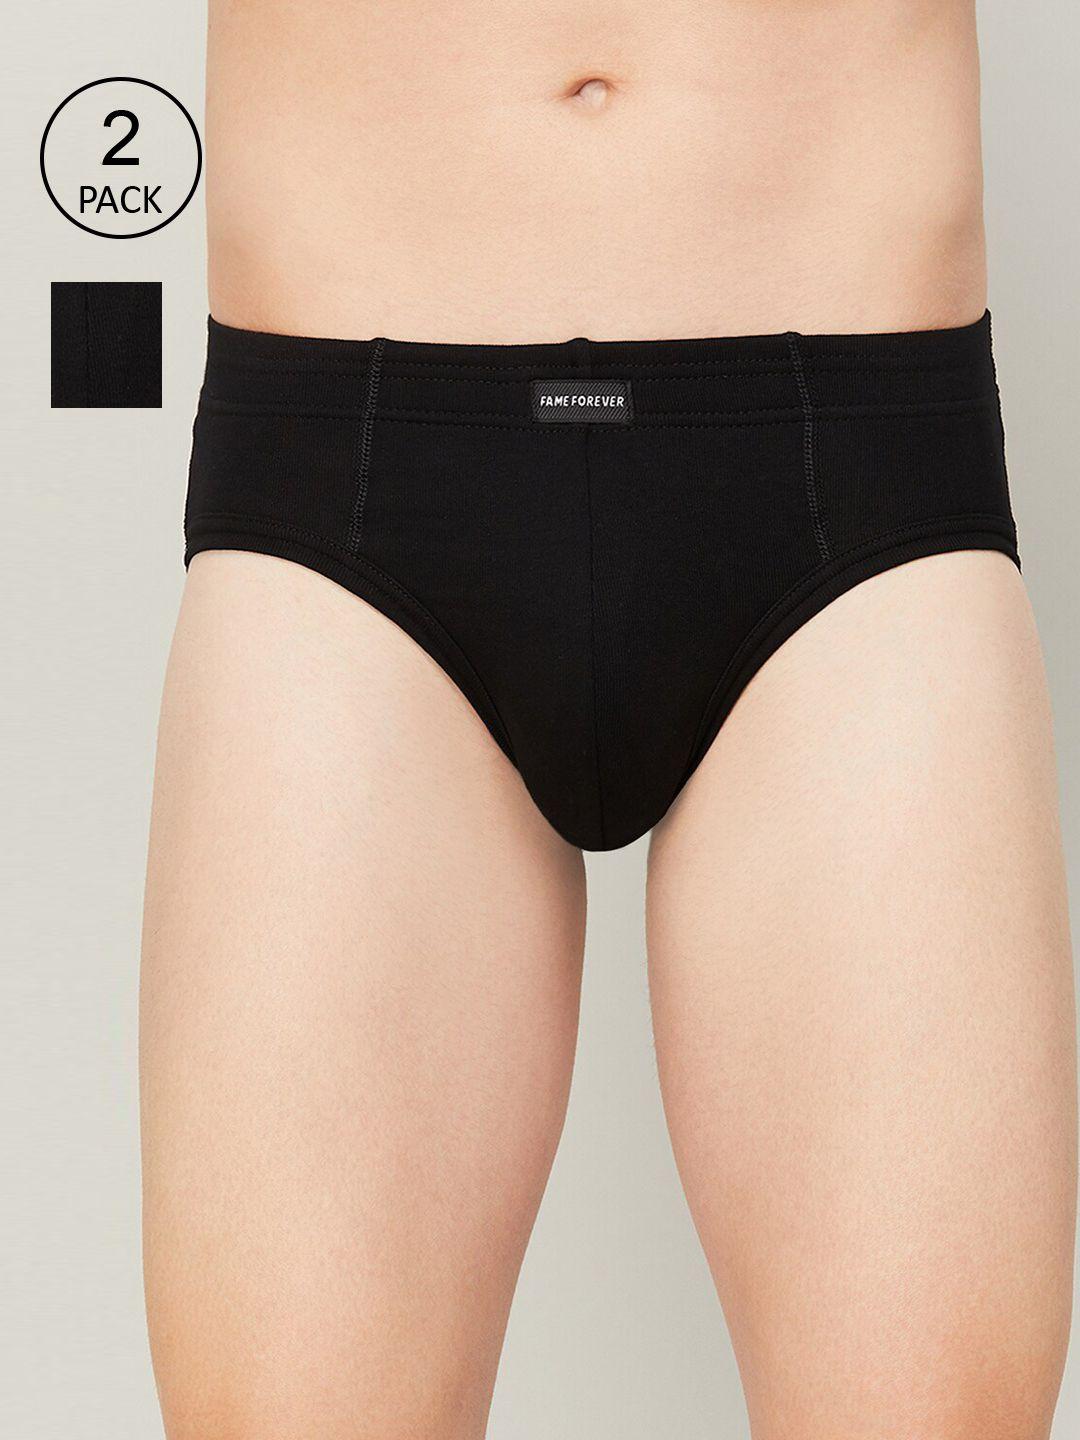 fame-forever-by-lifestyle-men-pack-of-2-black-cotton-basic-briefs